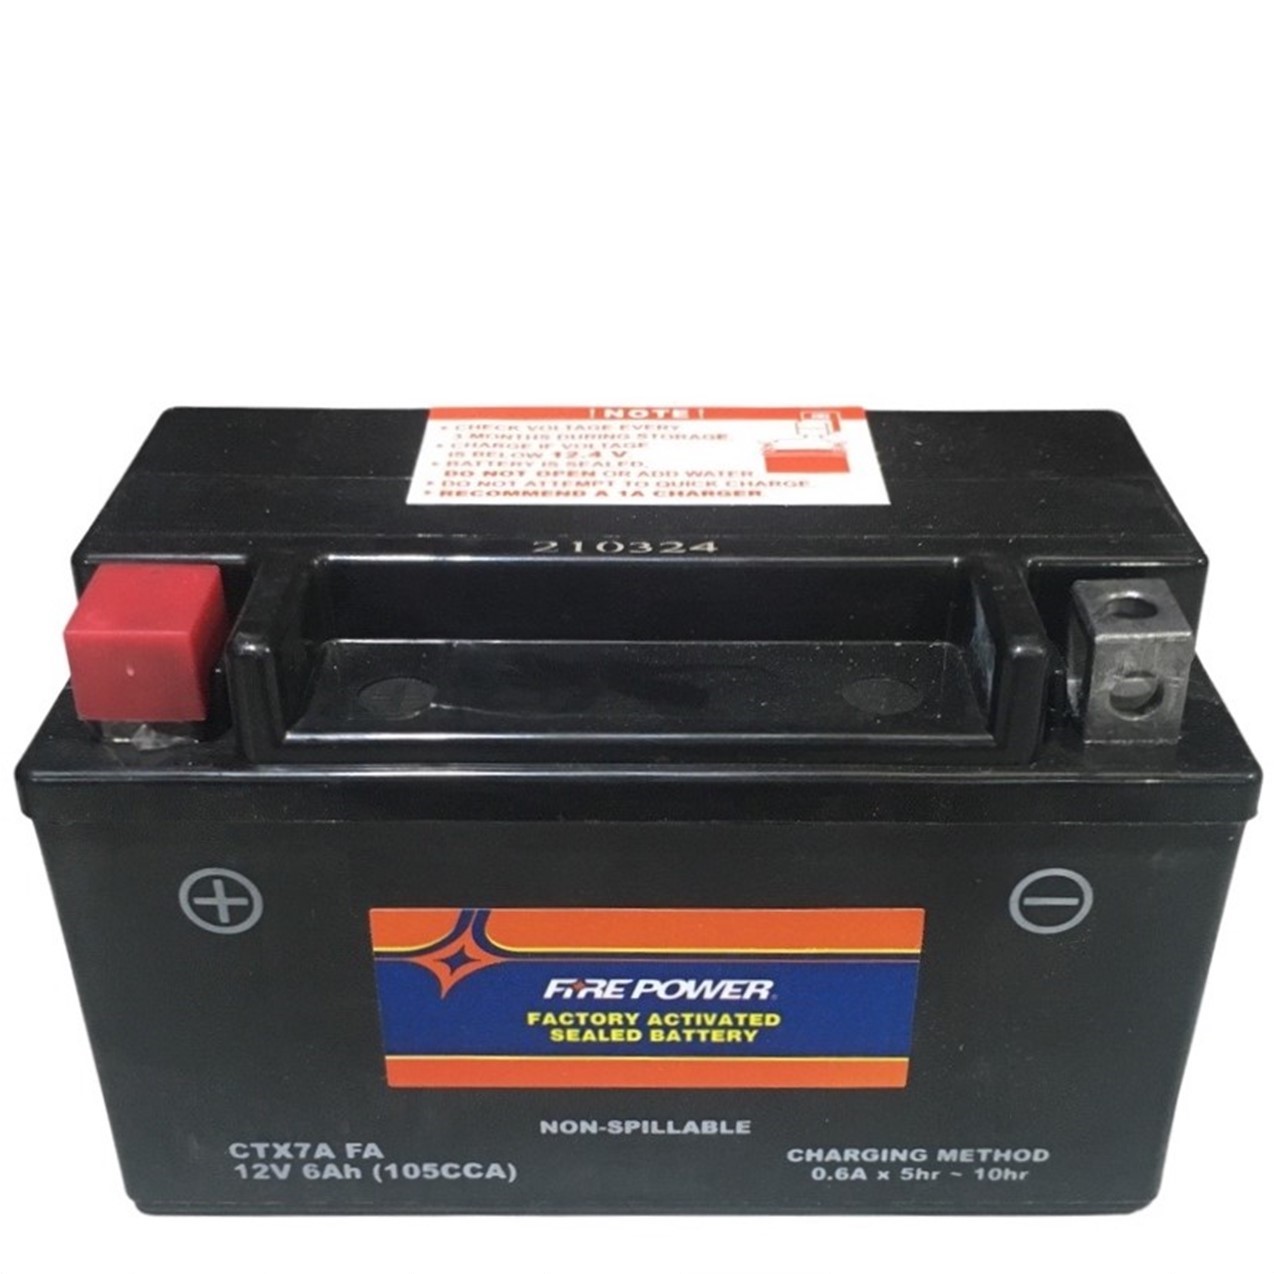 CTX7A FA Fire Power Battery Sealed Maintenance Free L=5 7/8" W=3 3/8" H=3.75" - Click Image to Close